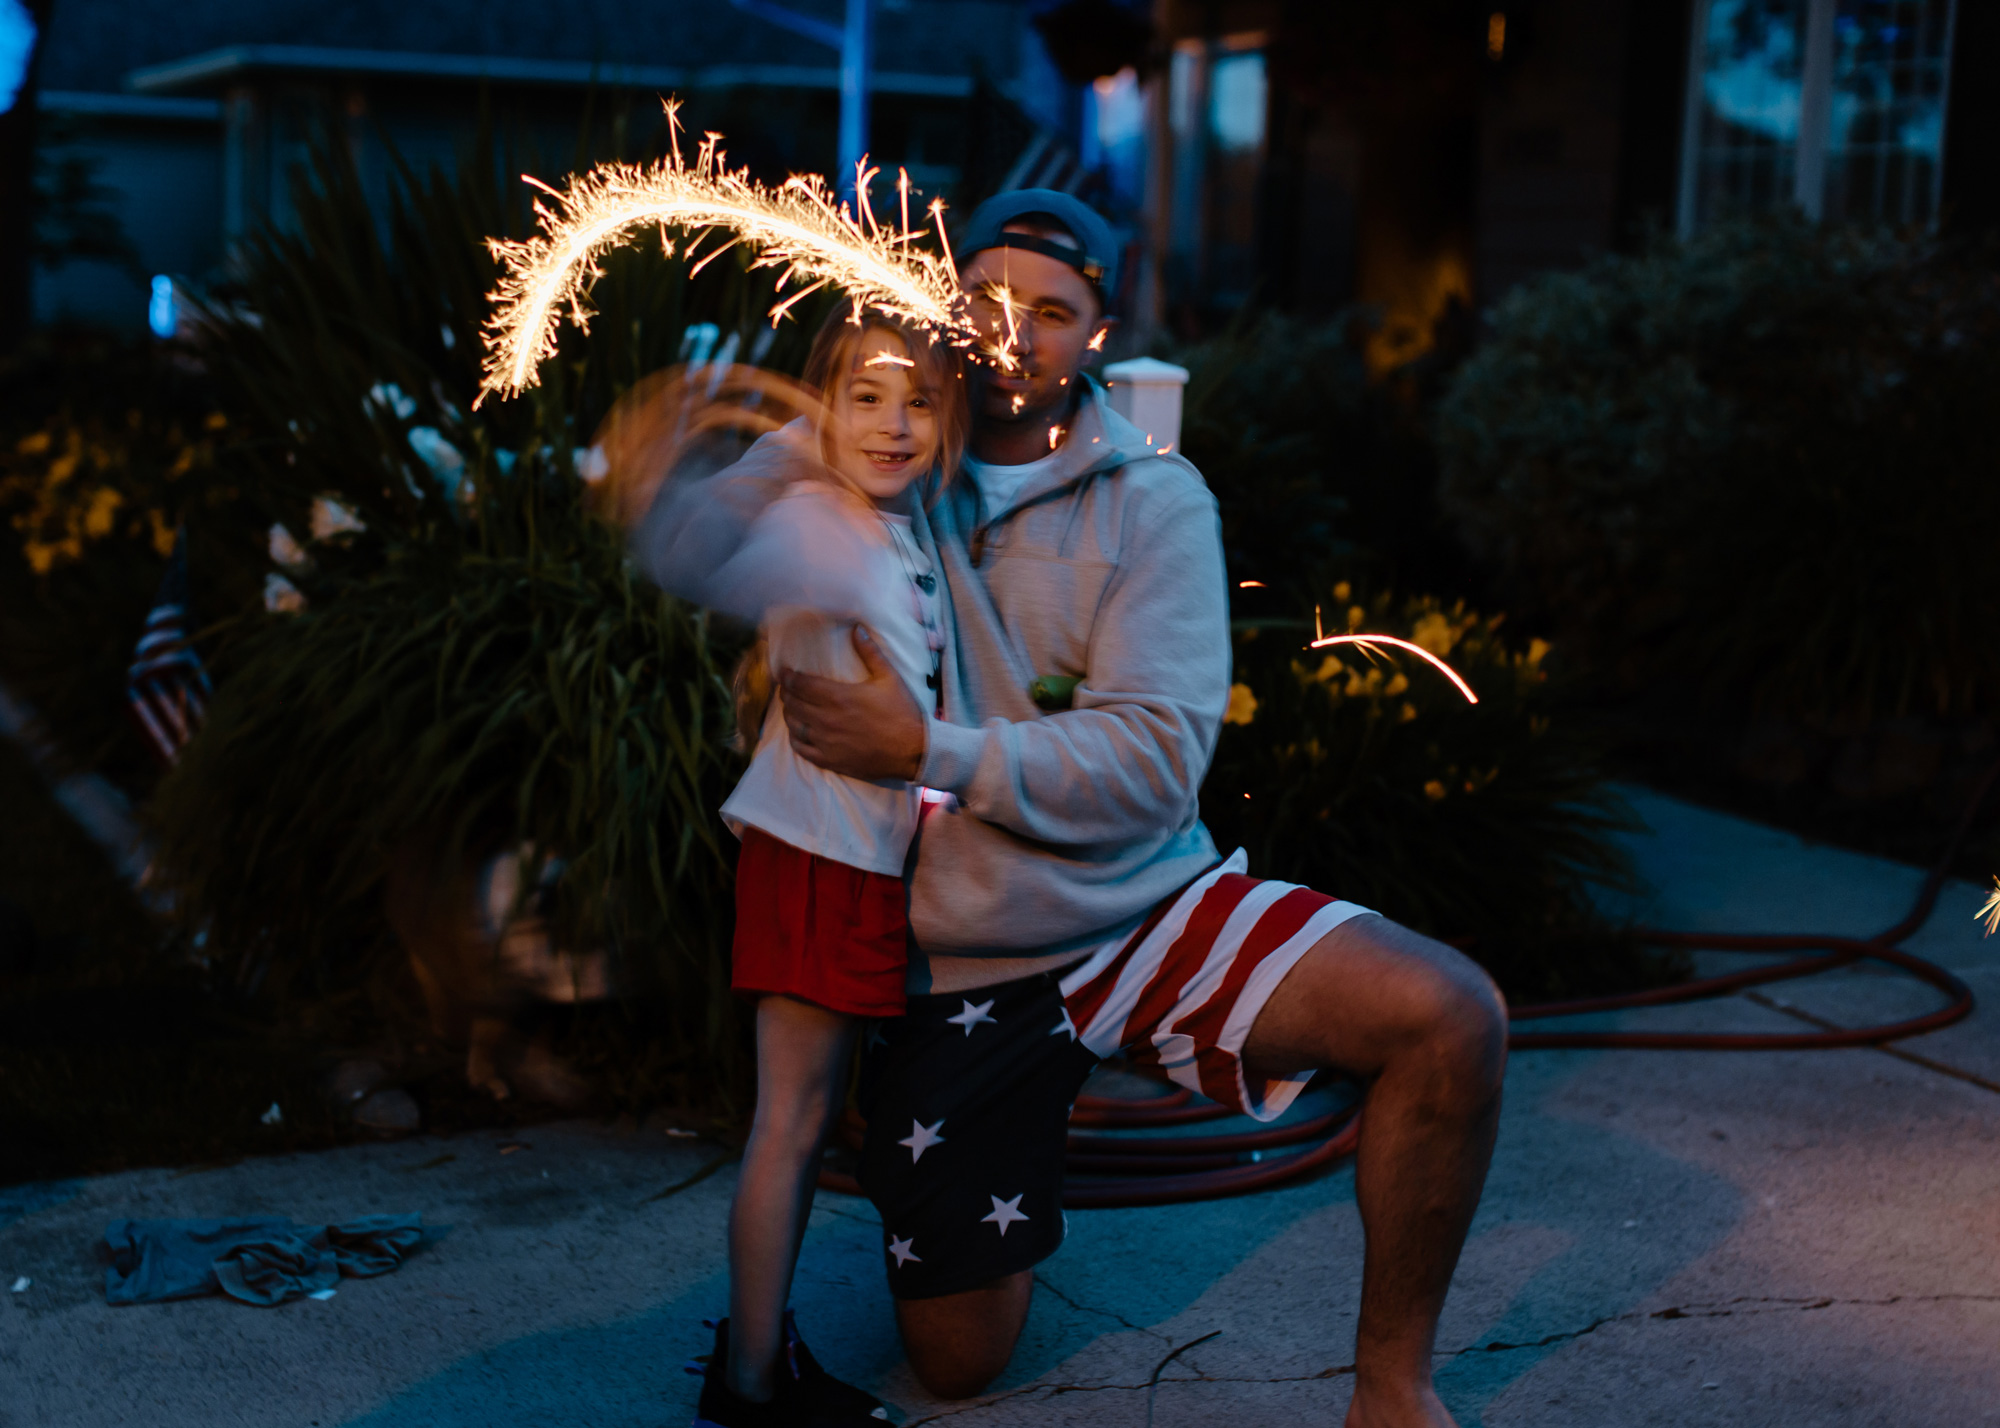 4 Tips for Safely Using Fireworks at Home